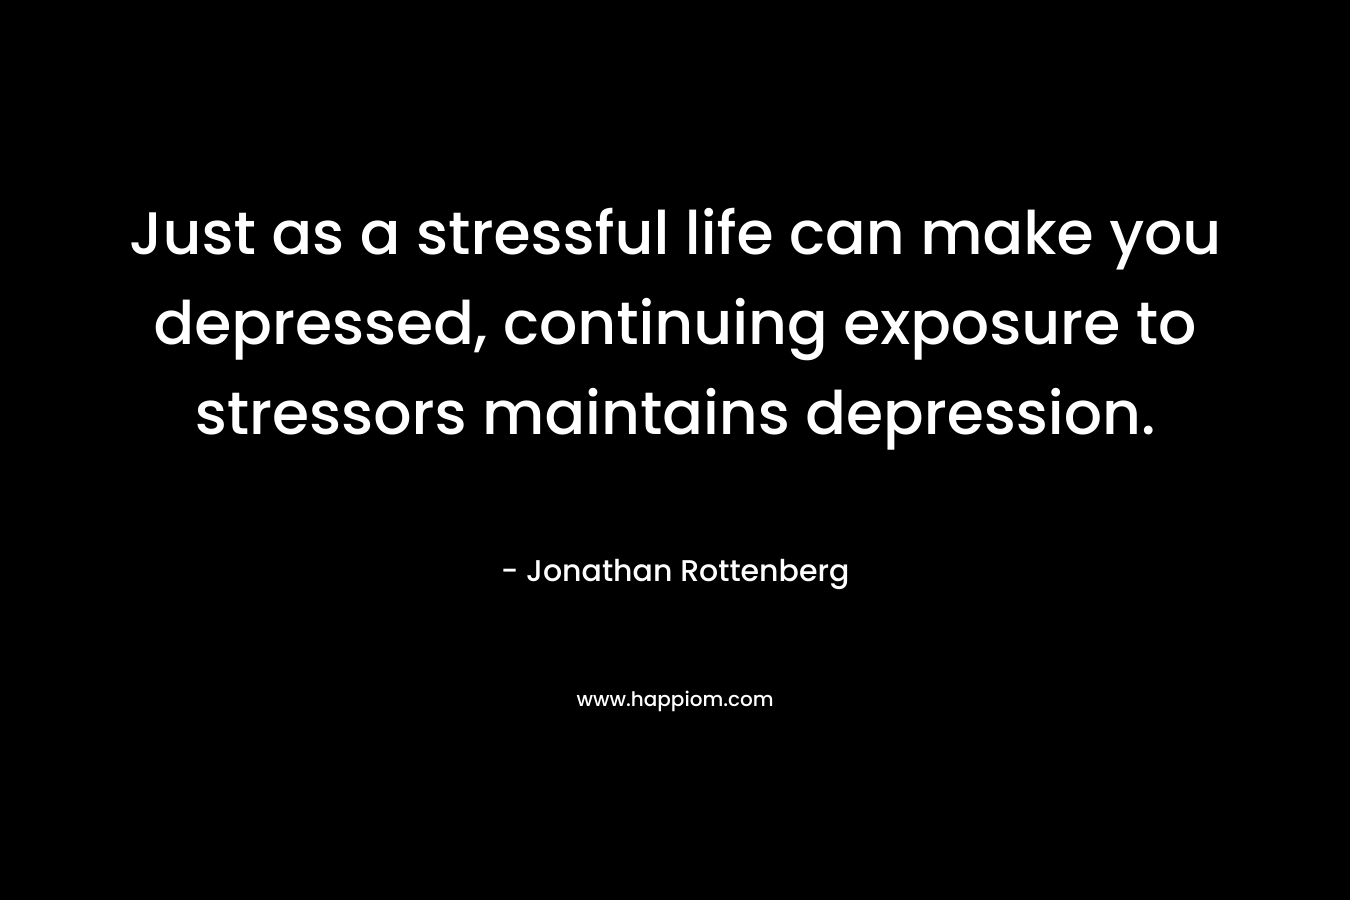 Just as a stressful life can make you depressed, continuing exposure to stressors maintains depression.